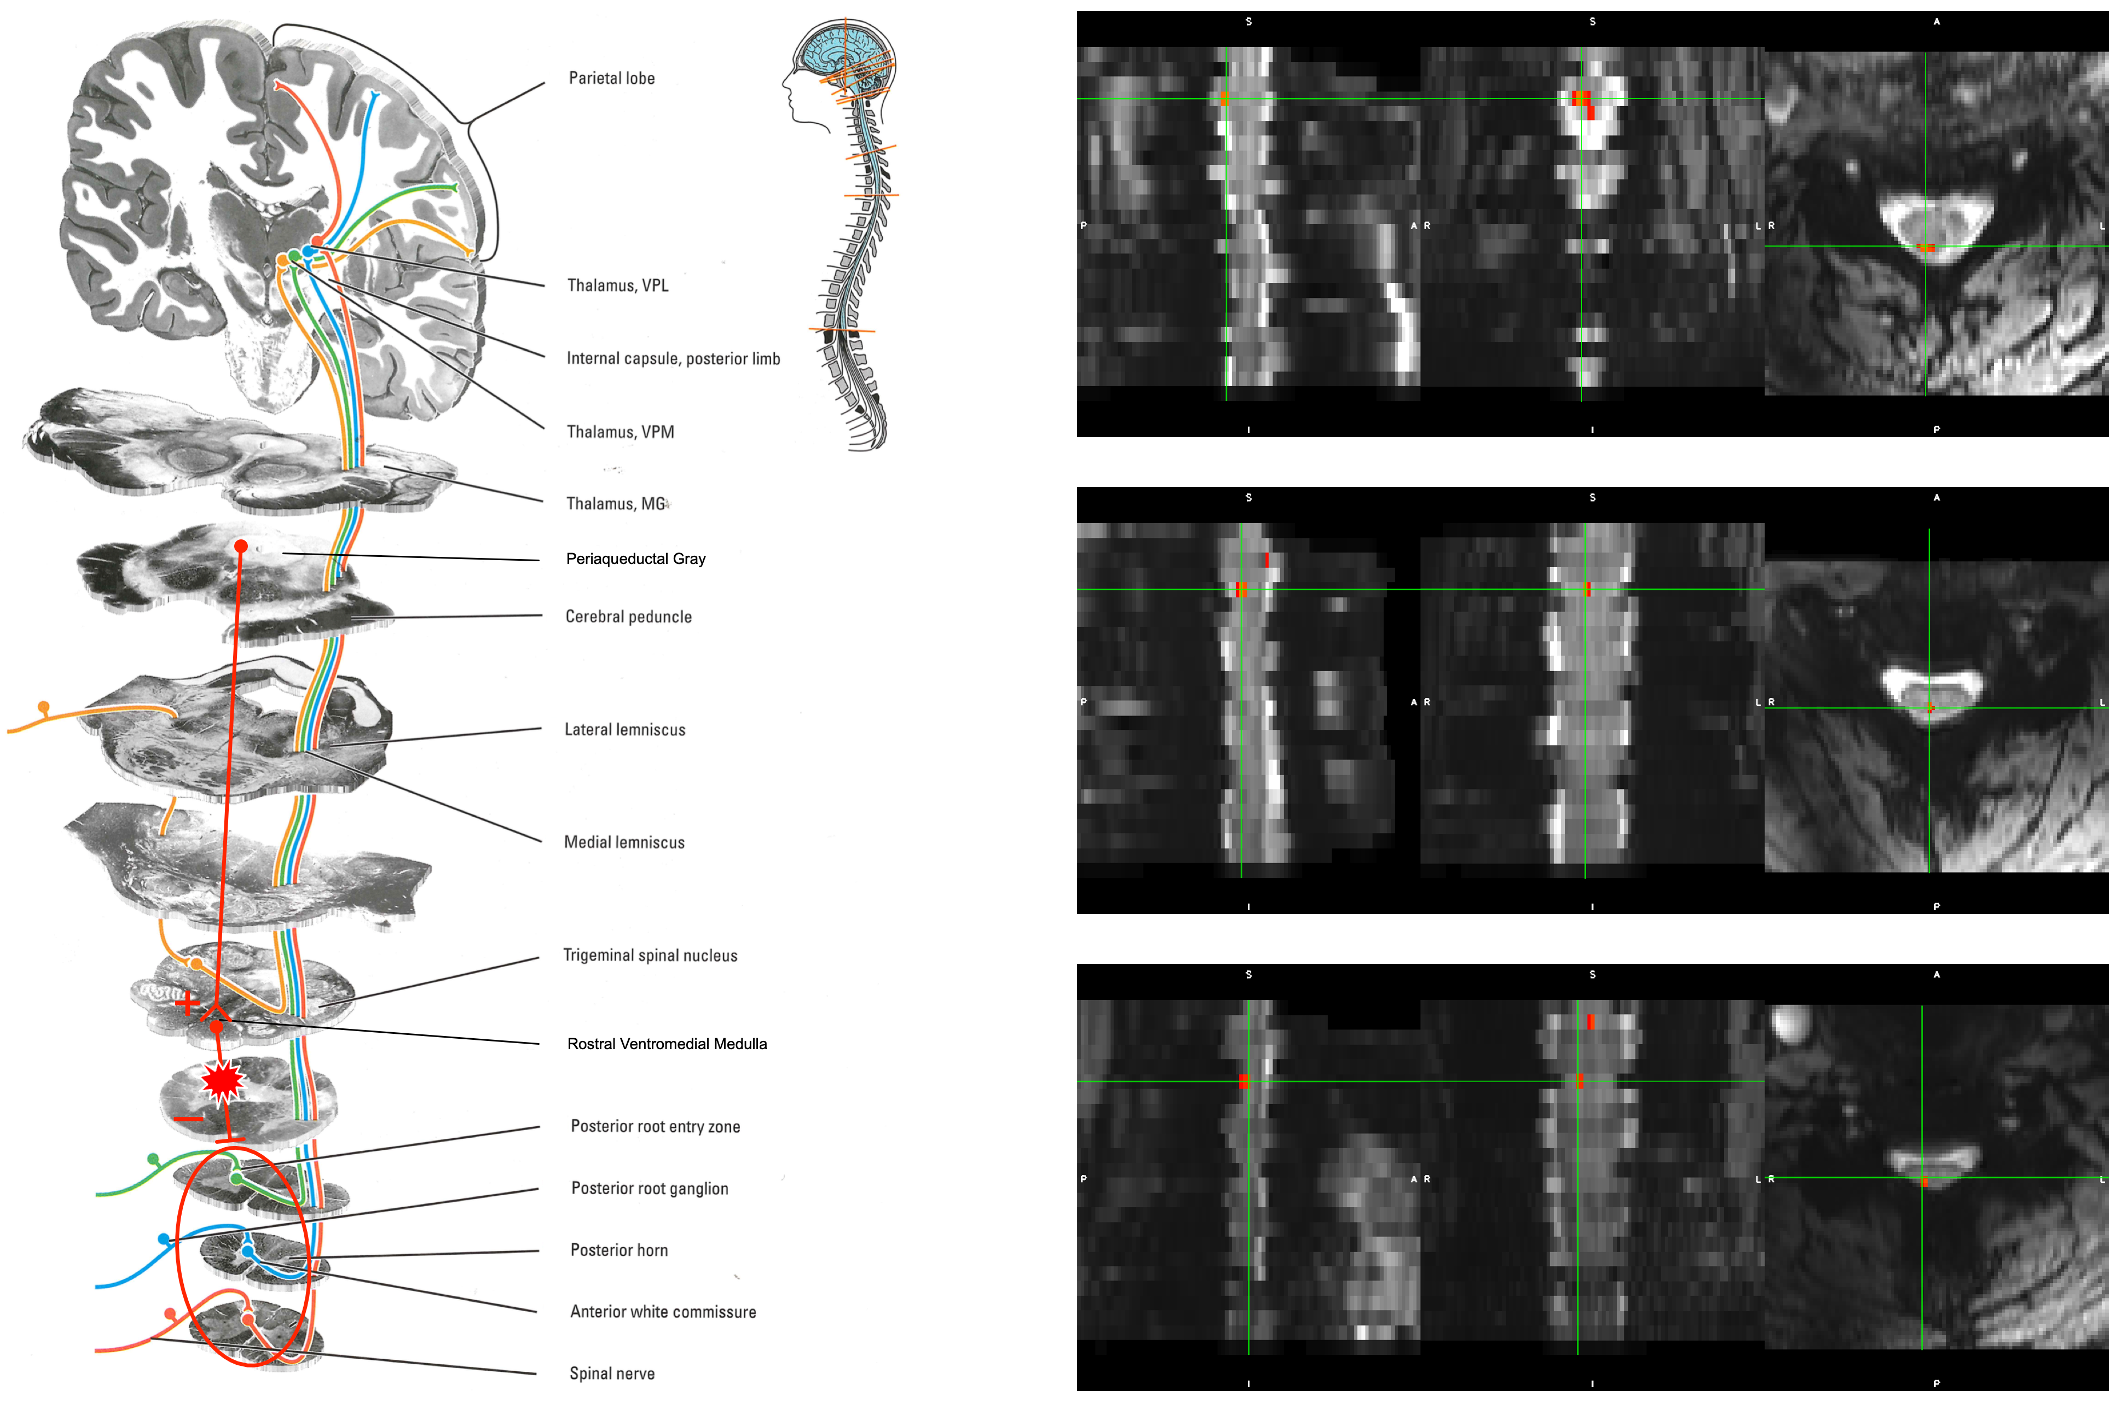 Thermal pain stimulus fMRI in the human spinal cord at 7 T